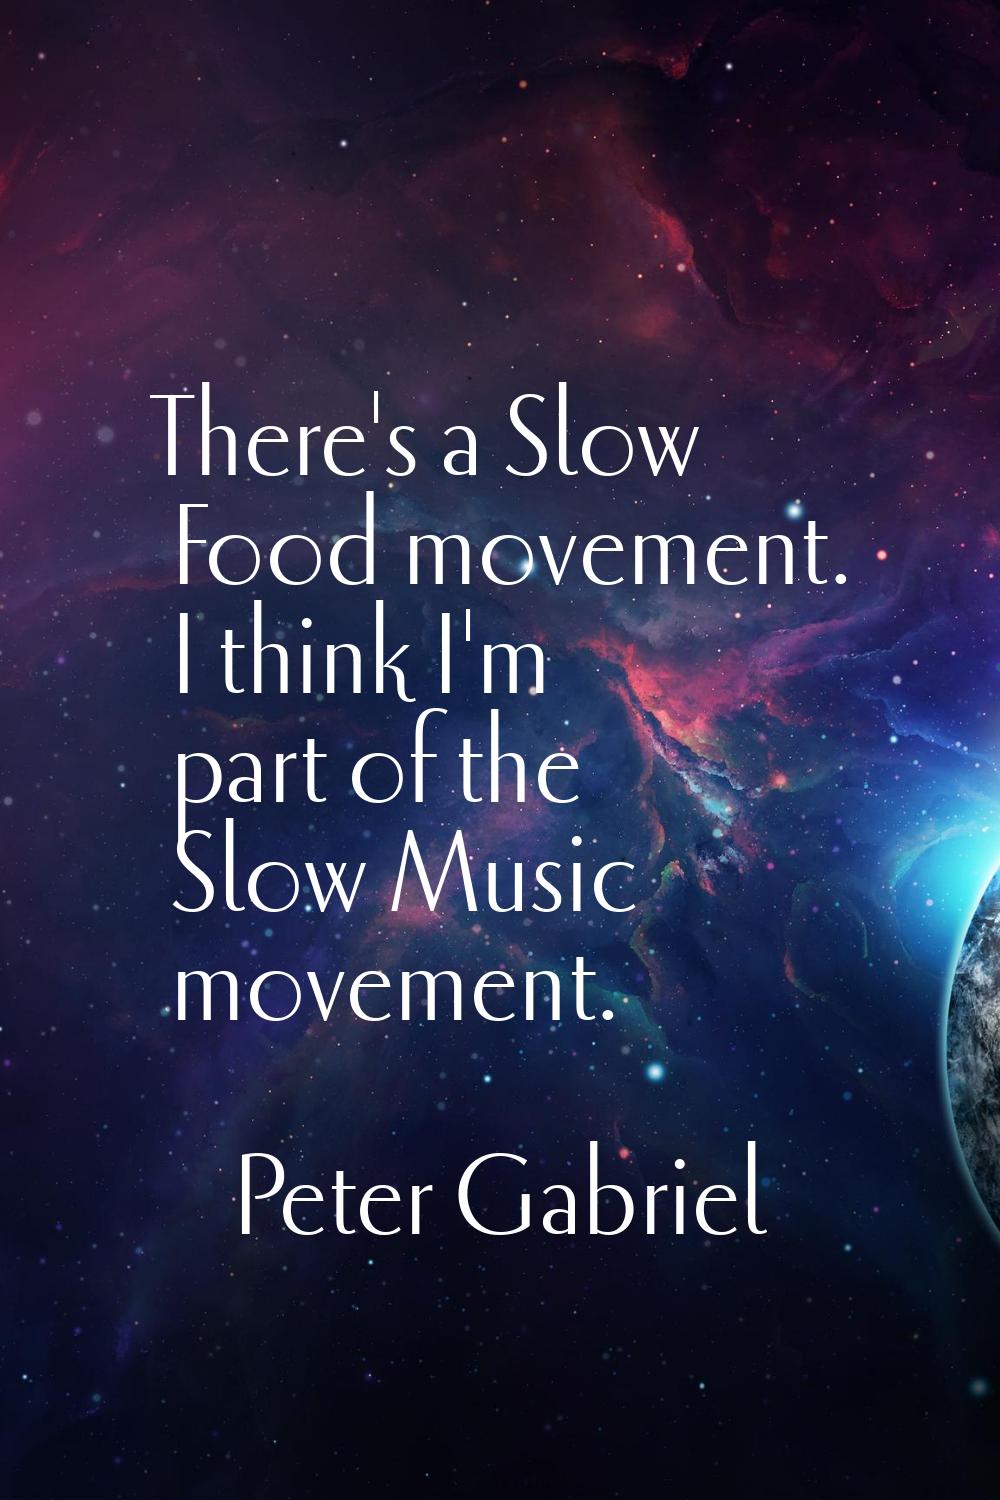 There's a Slow Food movement. I think I'm part of the Slow Music movement.